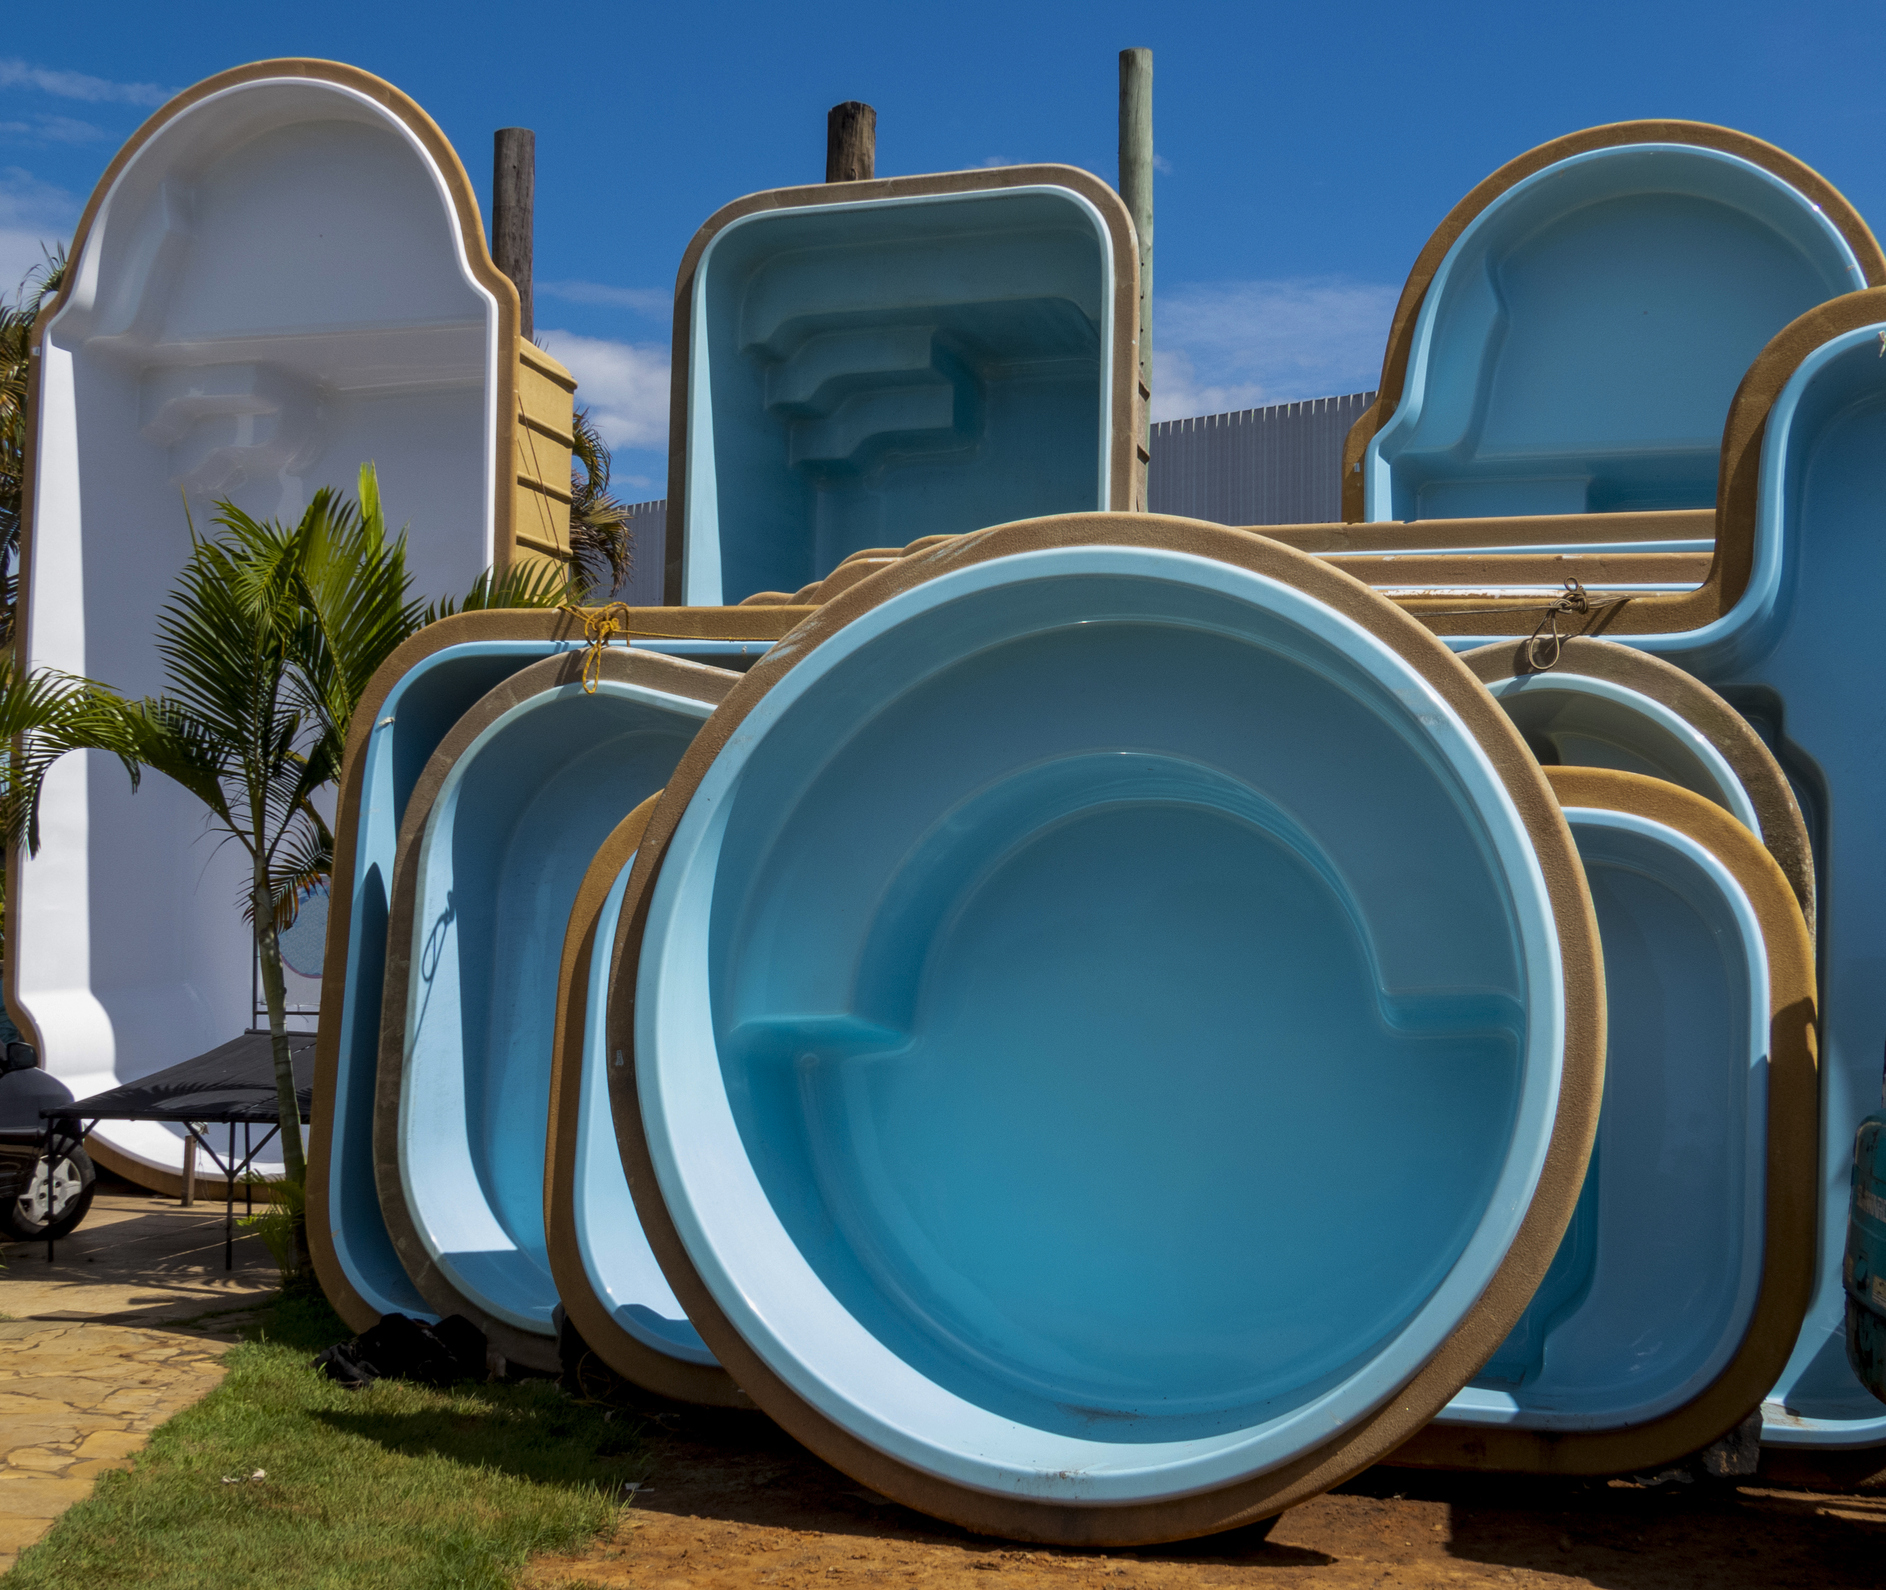 Blue and white fiberglass pools on display outside for sale.